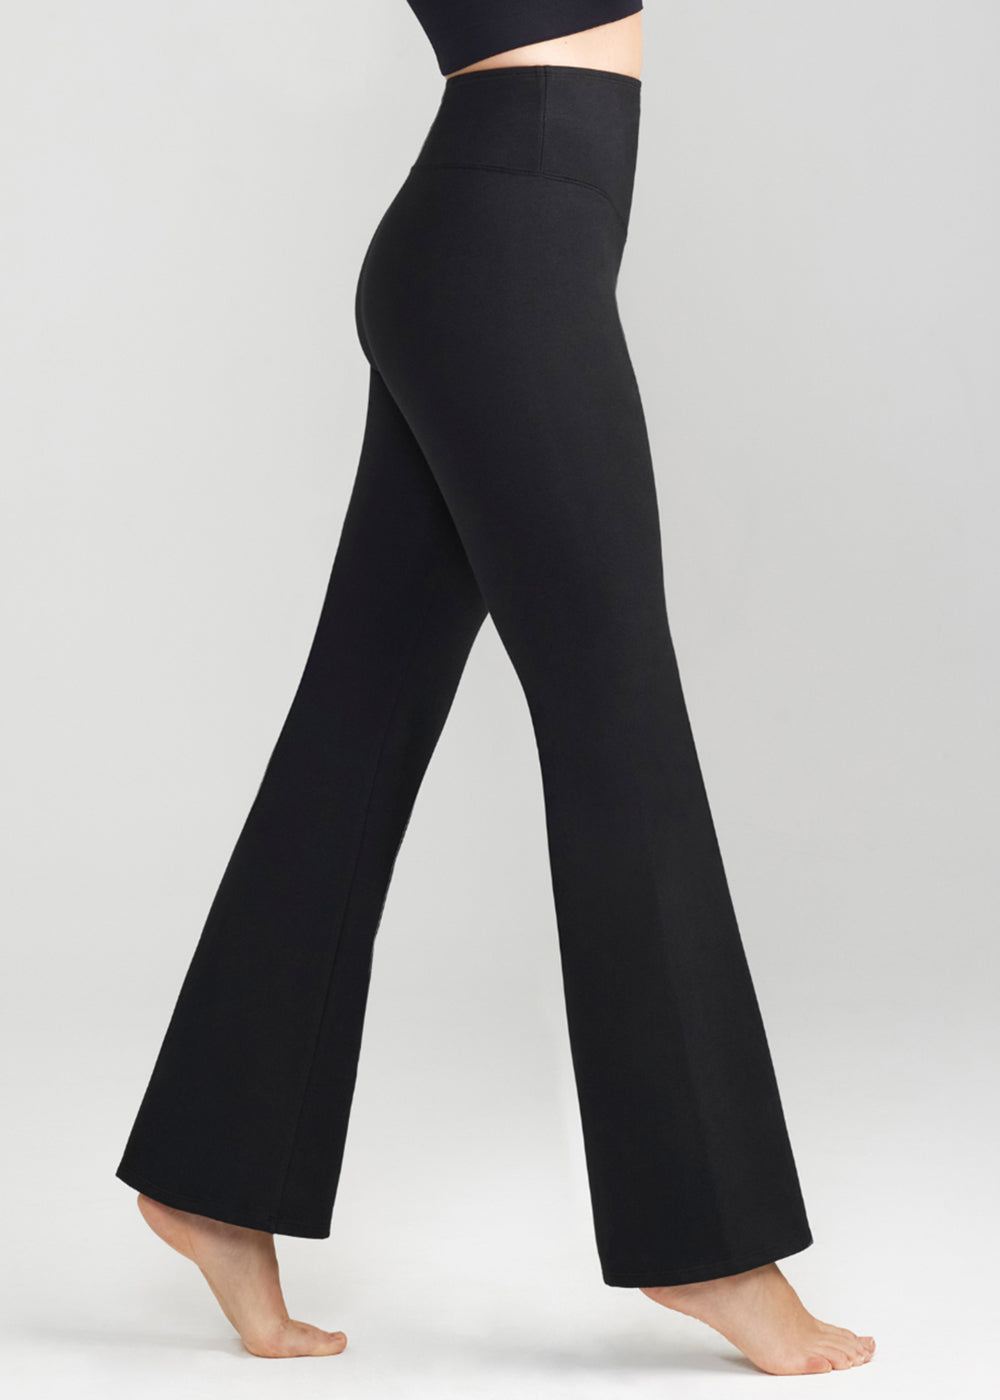 susie flare shaping legging - cotton stretch in Black worn by a woman standing sideways Yummie